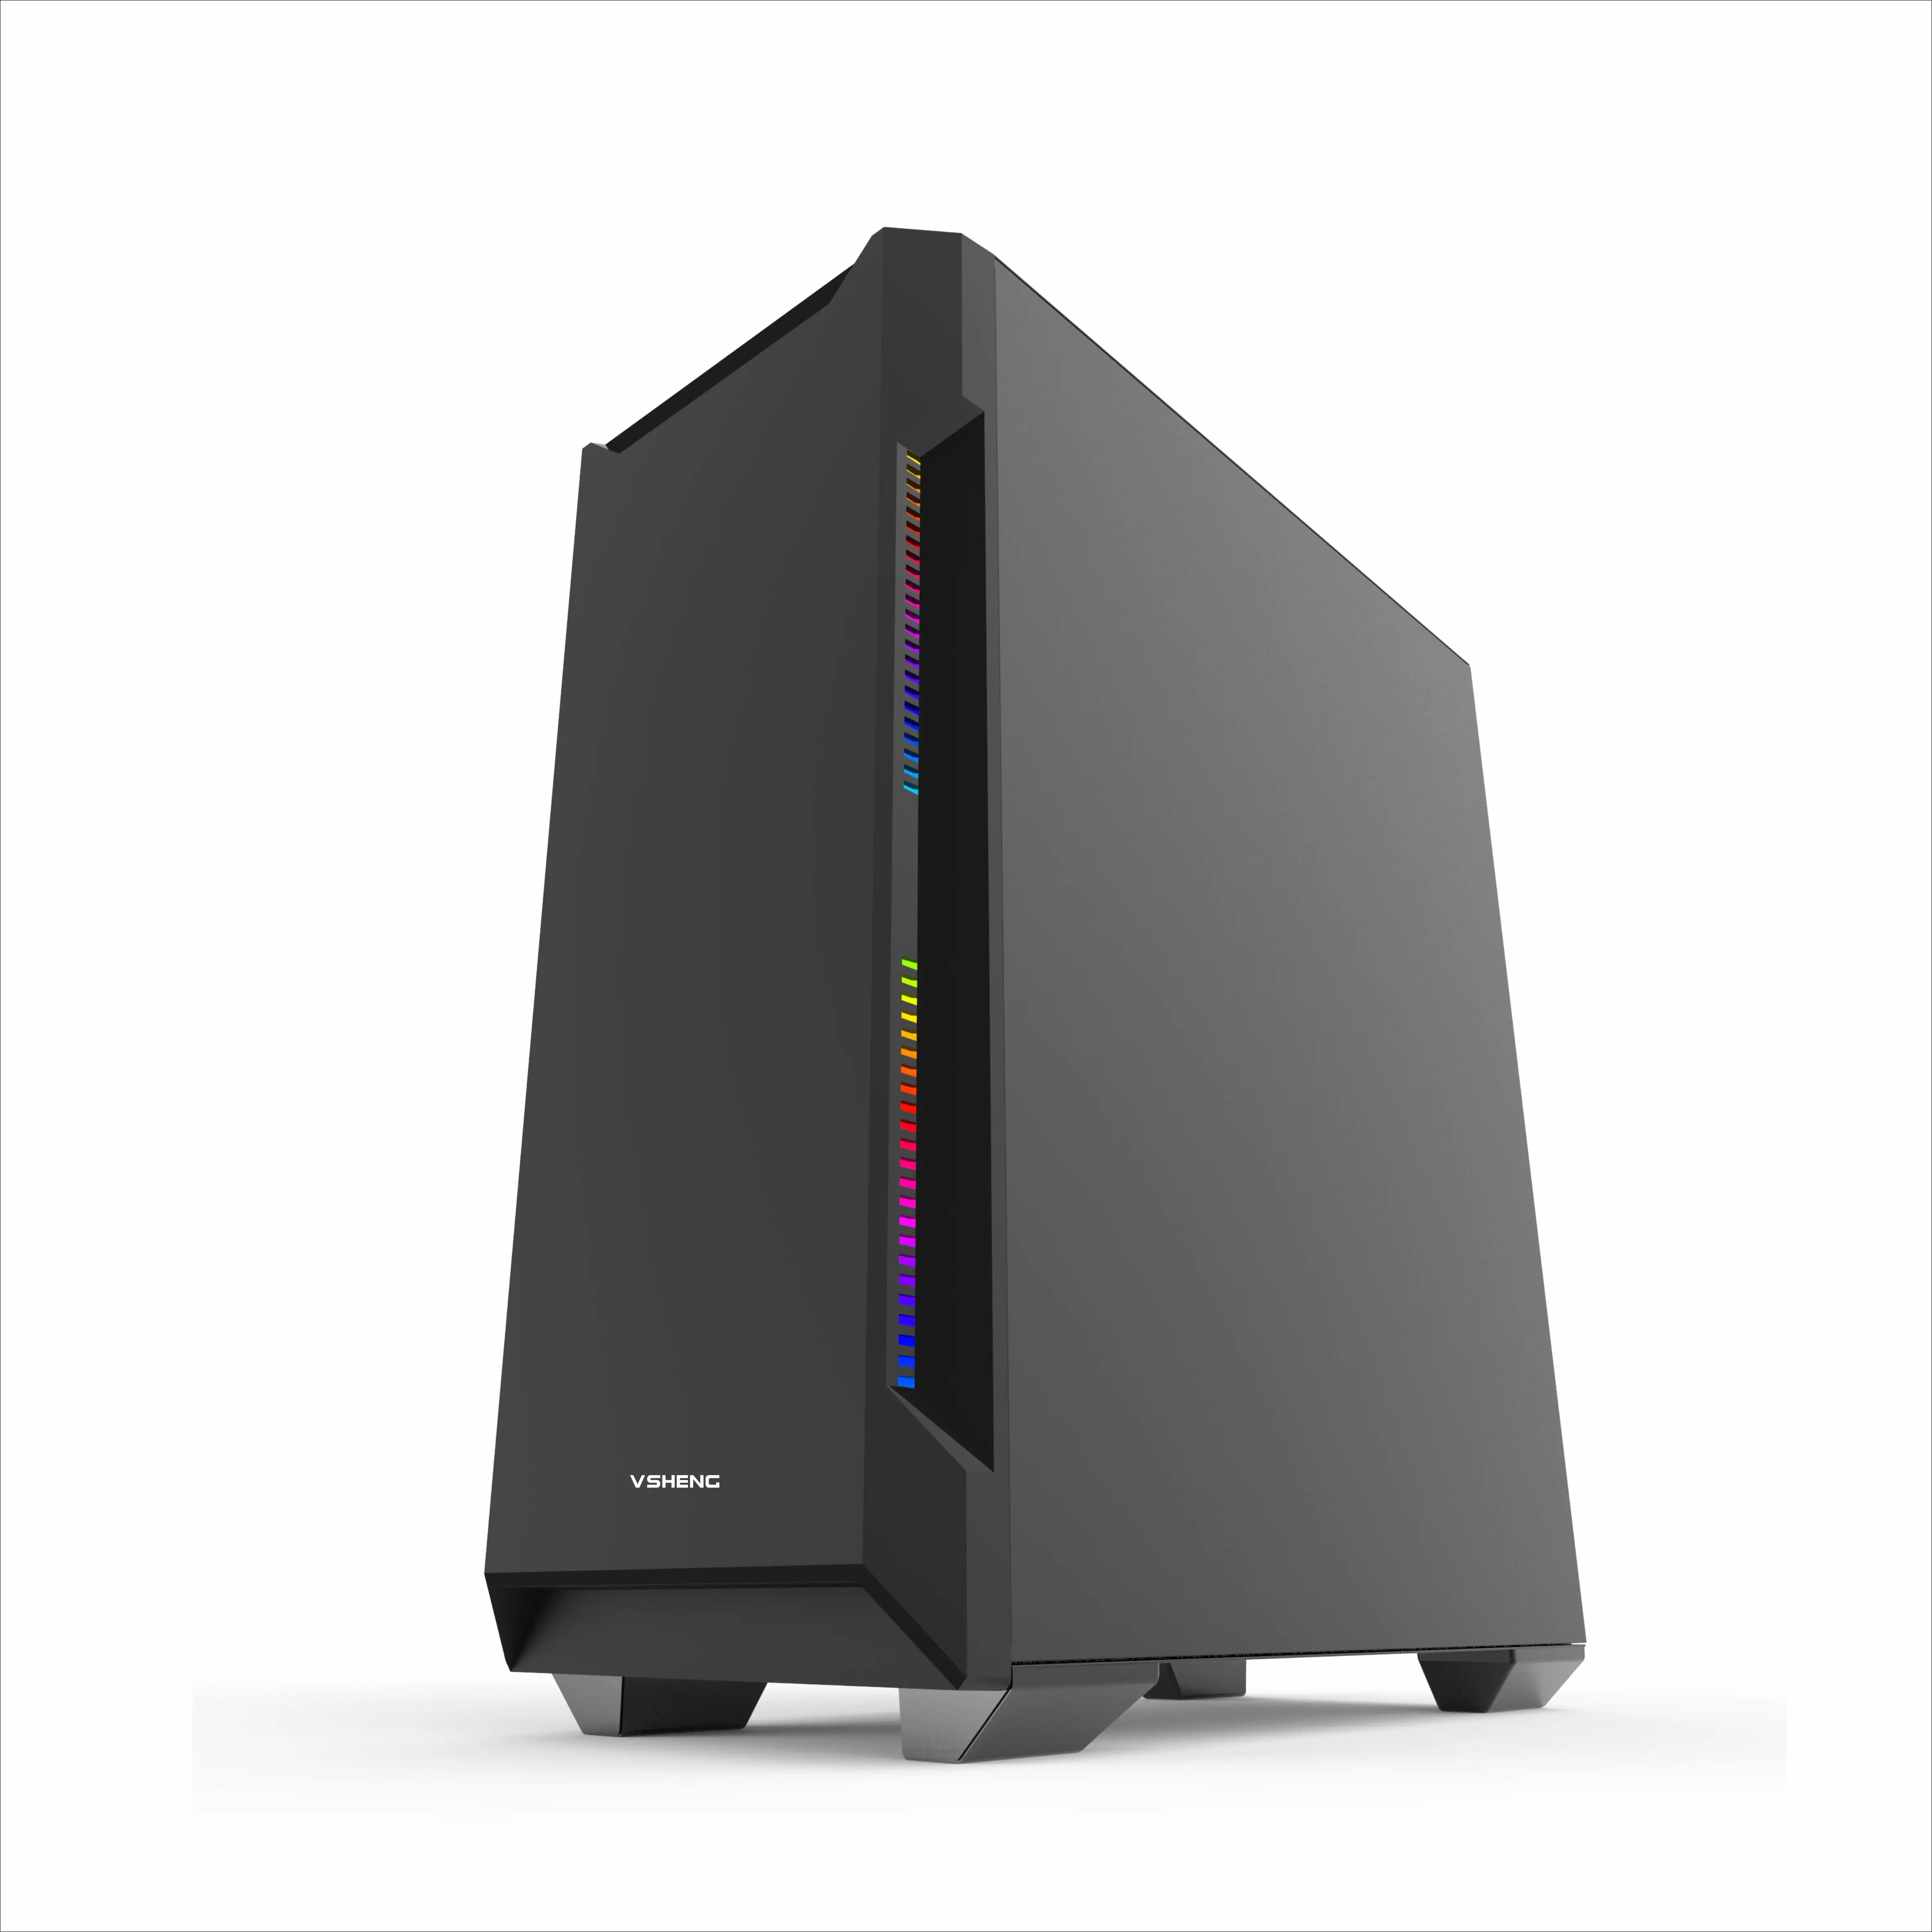 Eatx Deluxe Atx Mid Tower Cool Master Gamming Game Eatx Gaming Rgb Usb C Computer Cabinet Case For Pc